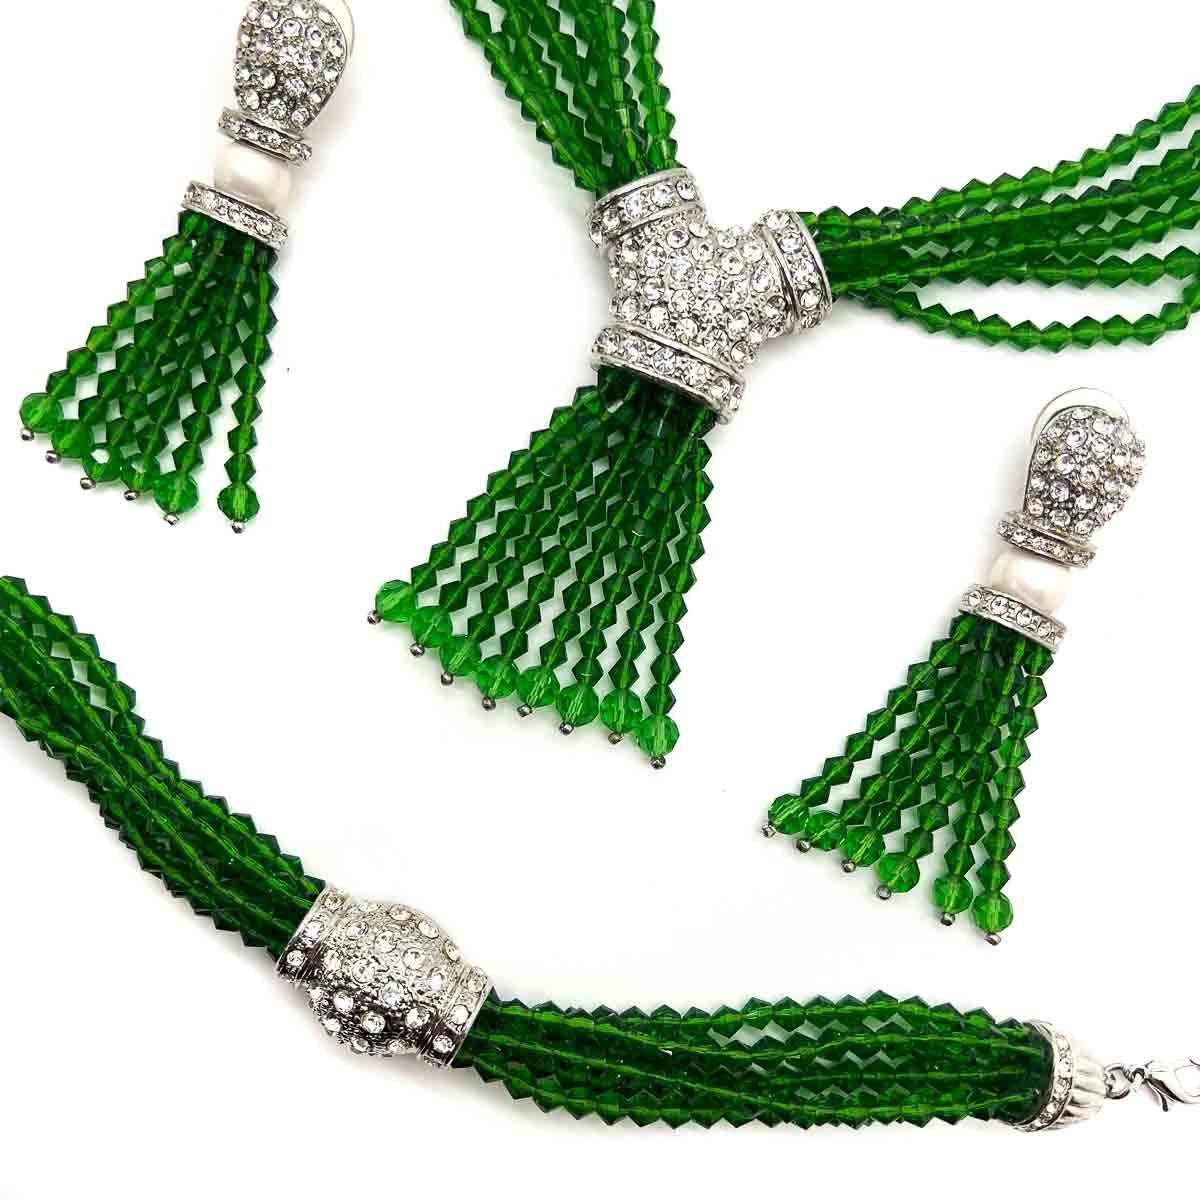 A magnificent suite, a Vintage Emerald Glass Torsade Necklace, Bracelet and Statement Earrings. Emerald faceted beads, pearls and white crystals making for a timeless combination. Wear together for maximum impact and keep your style options open